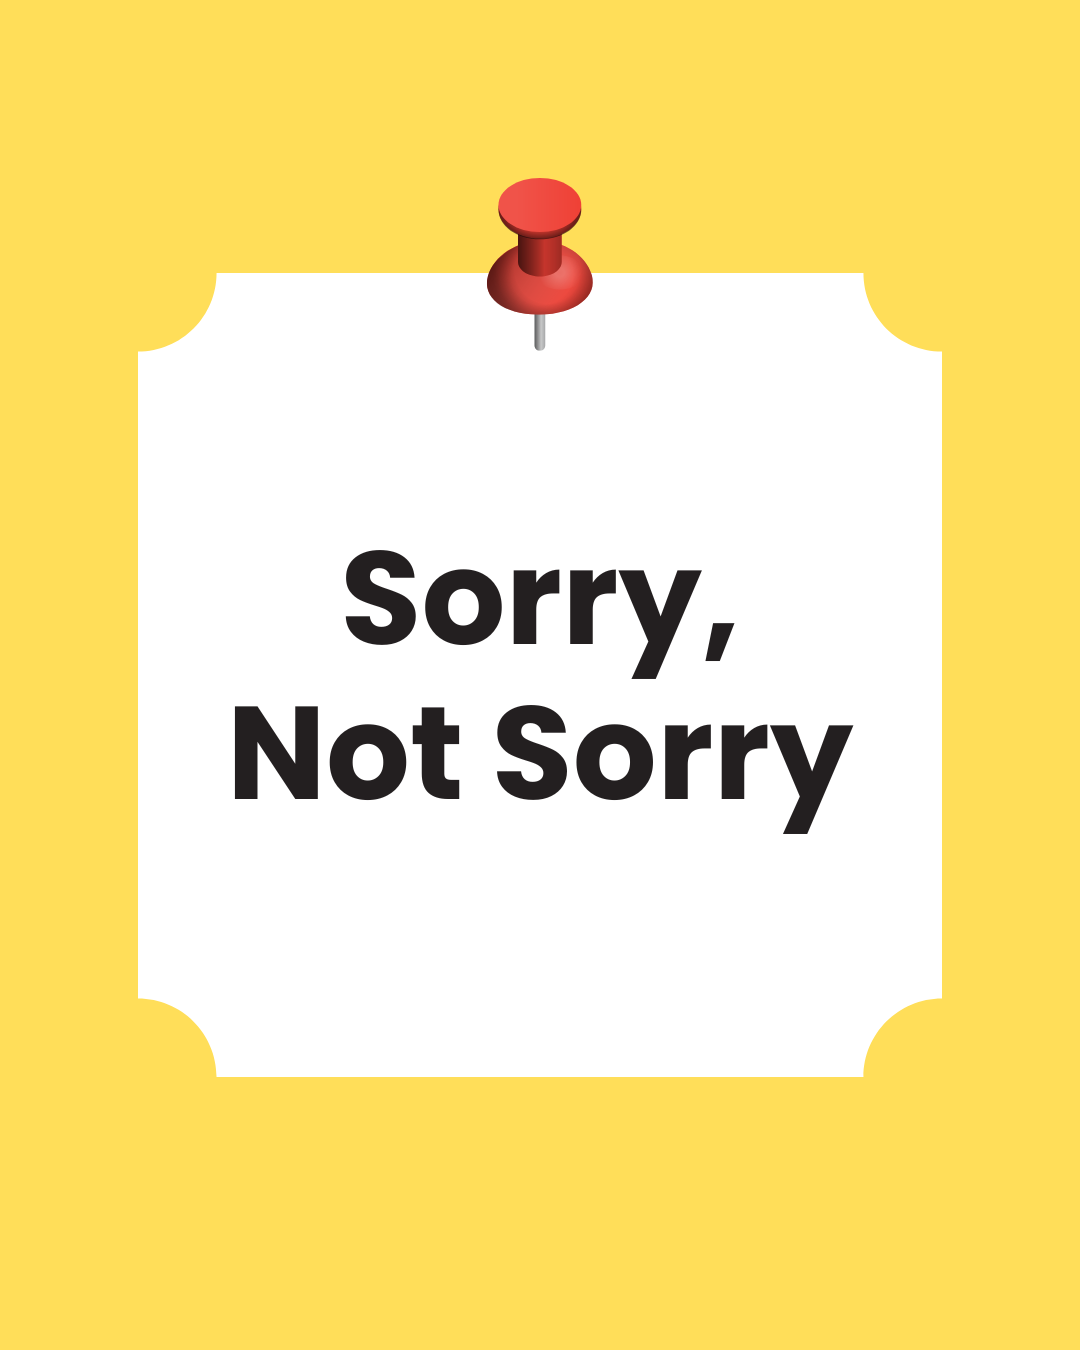 Sorry, Not Sorry — Stop Apologizing, by Mary Annthipie Bane